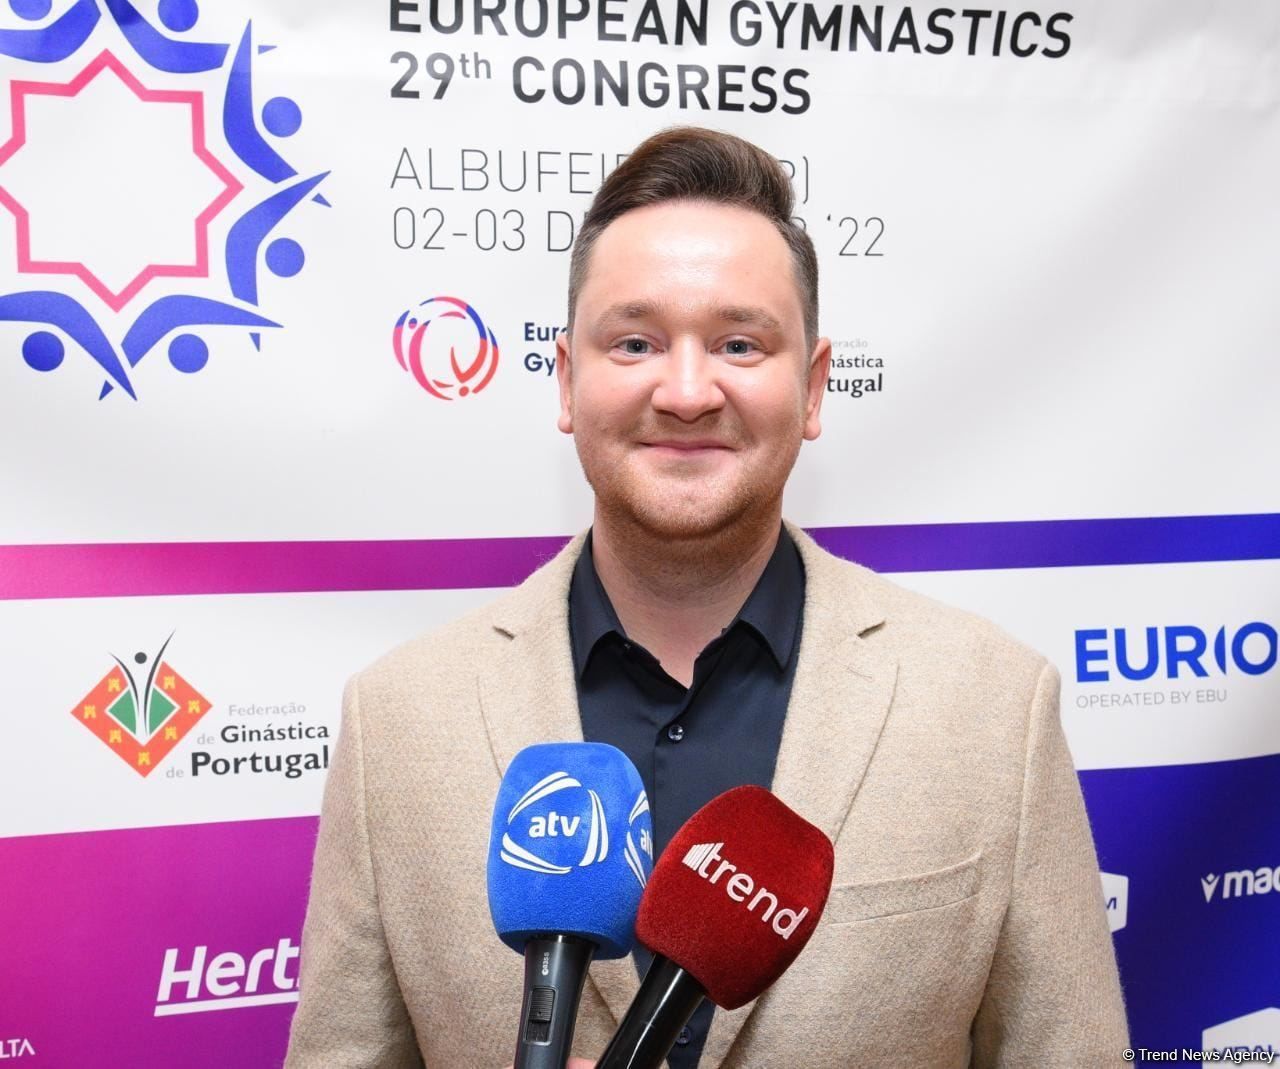 Great honor to become member of tech cmte of European Gymnastics - AGF rep